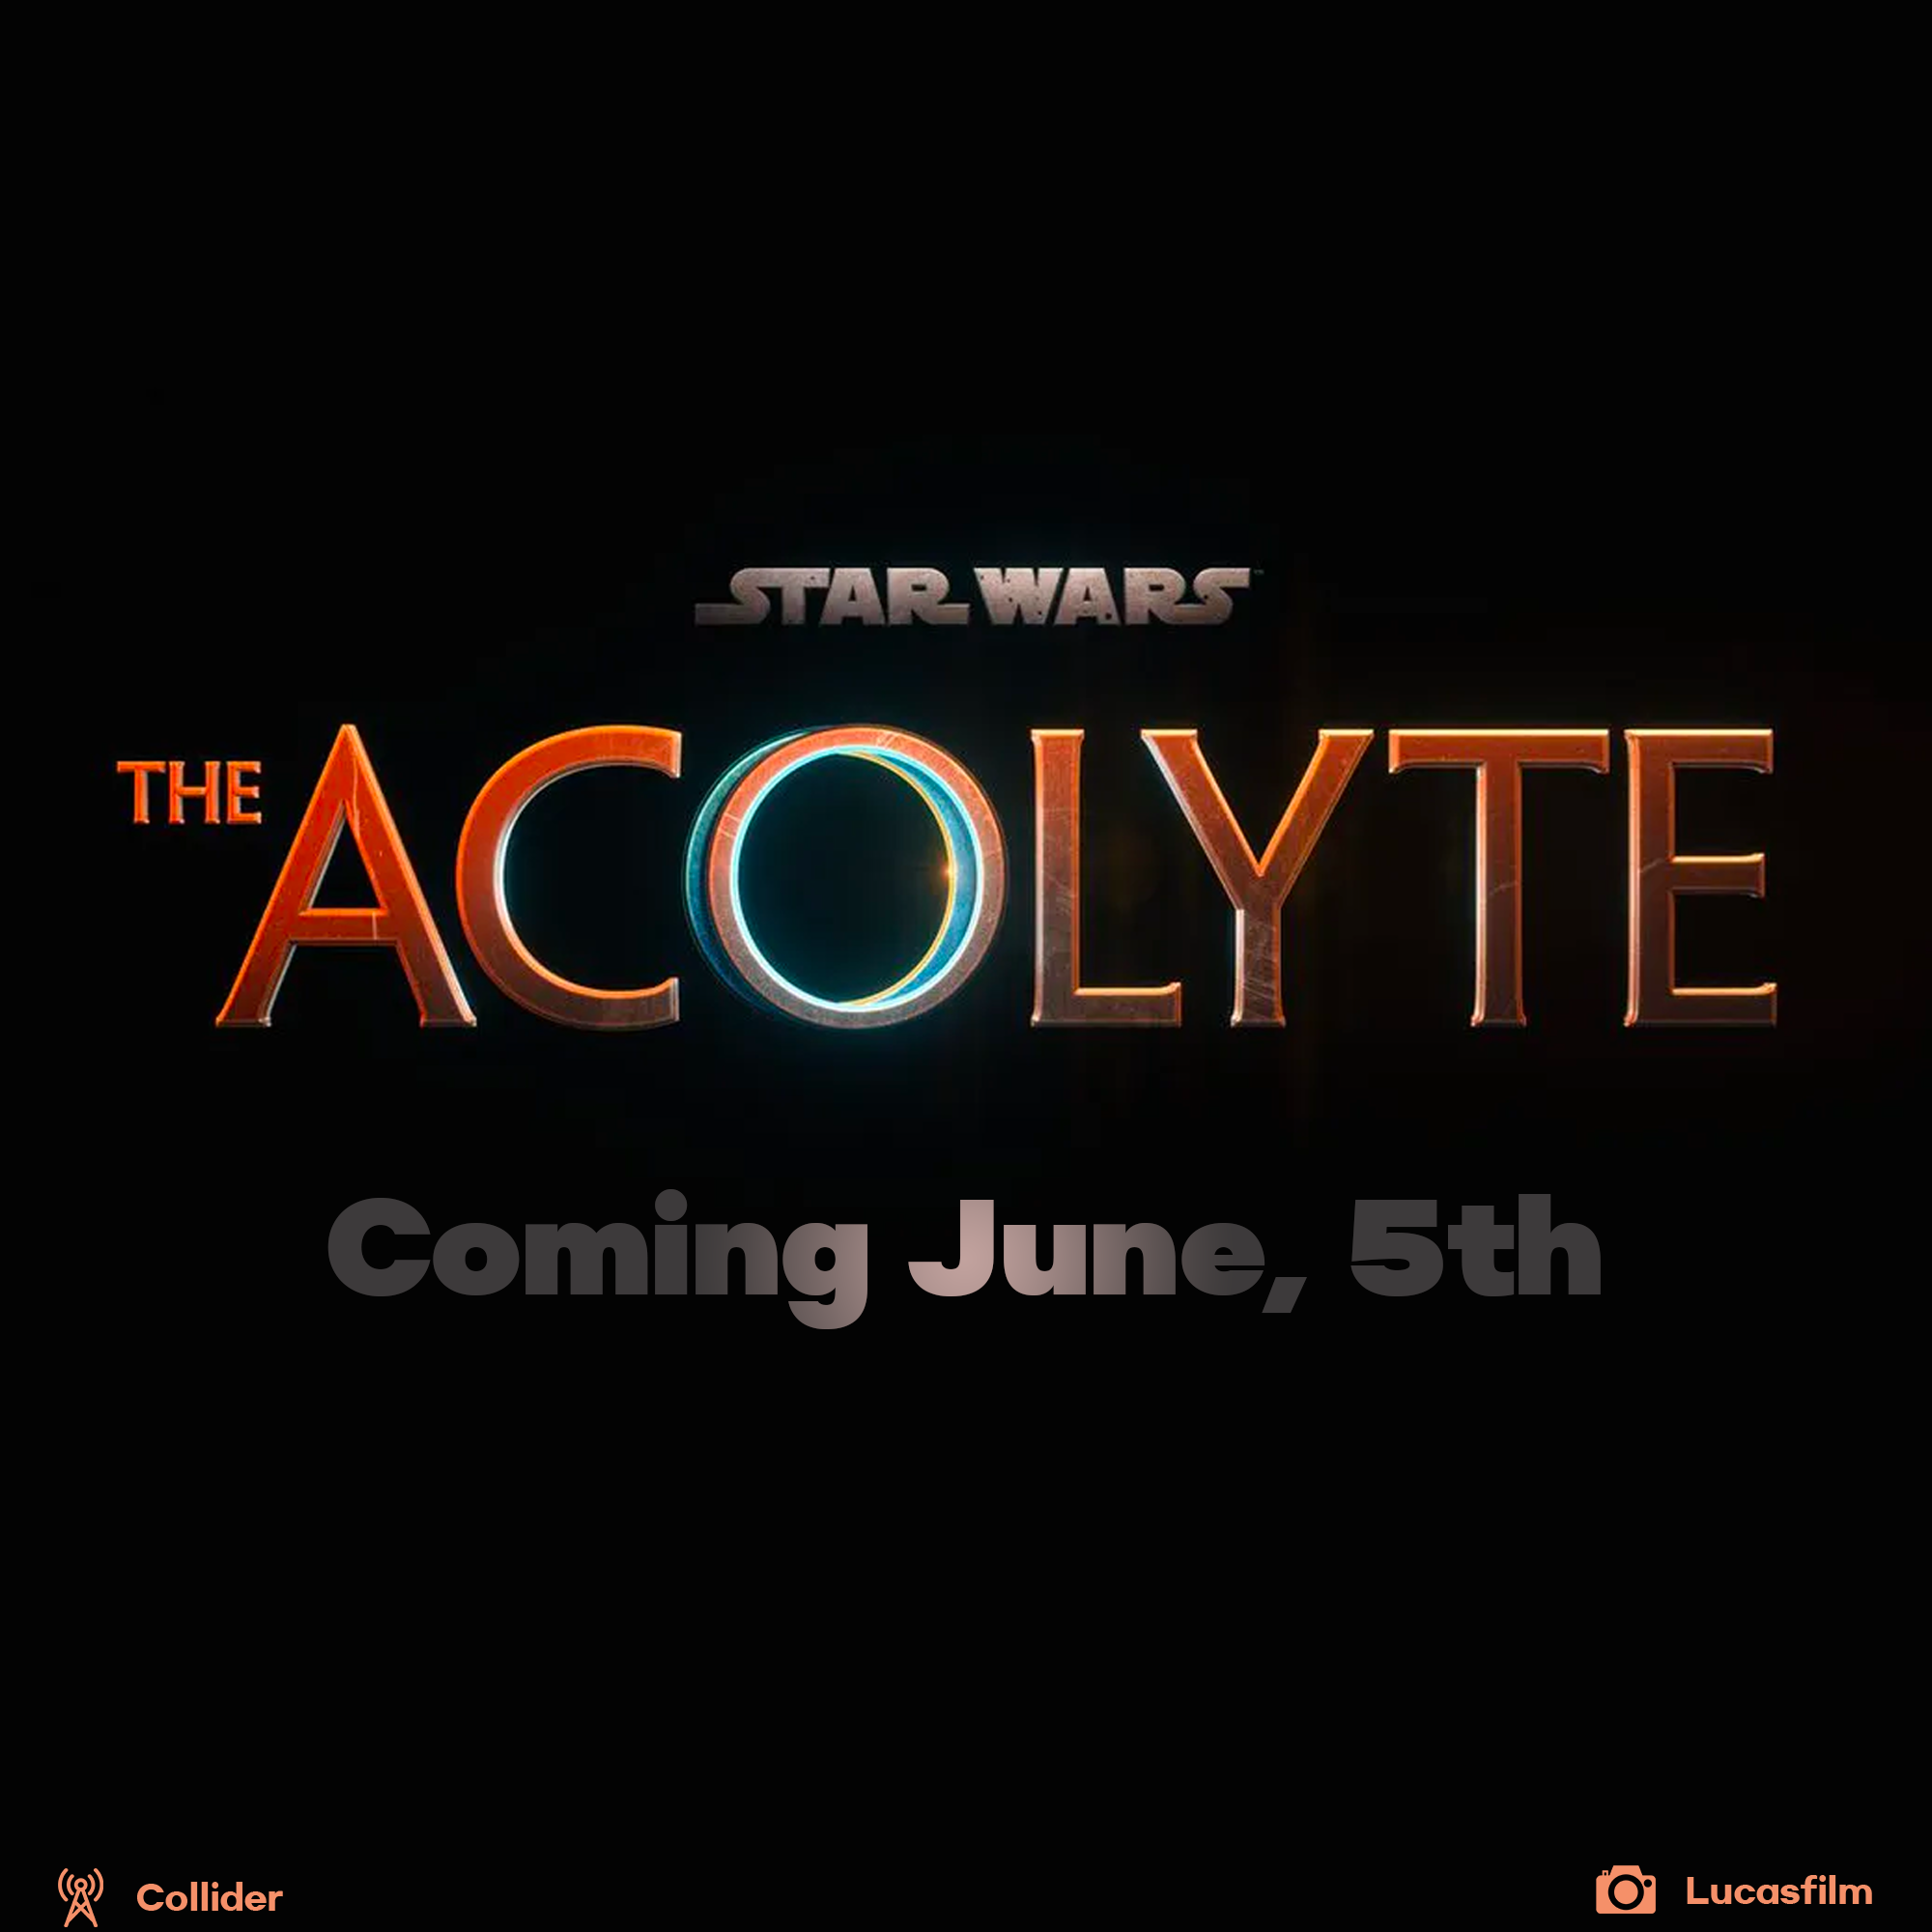 Star Wars Acolyte is coming on June, 5th